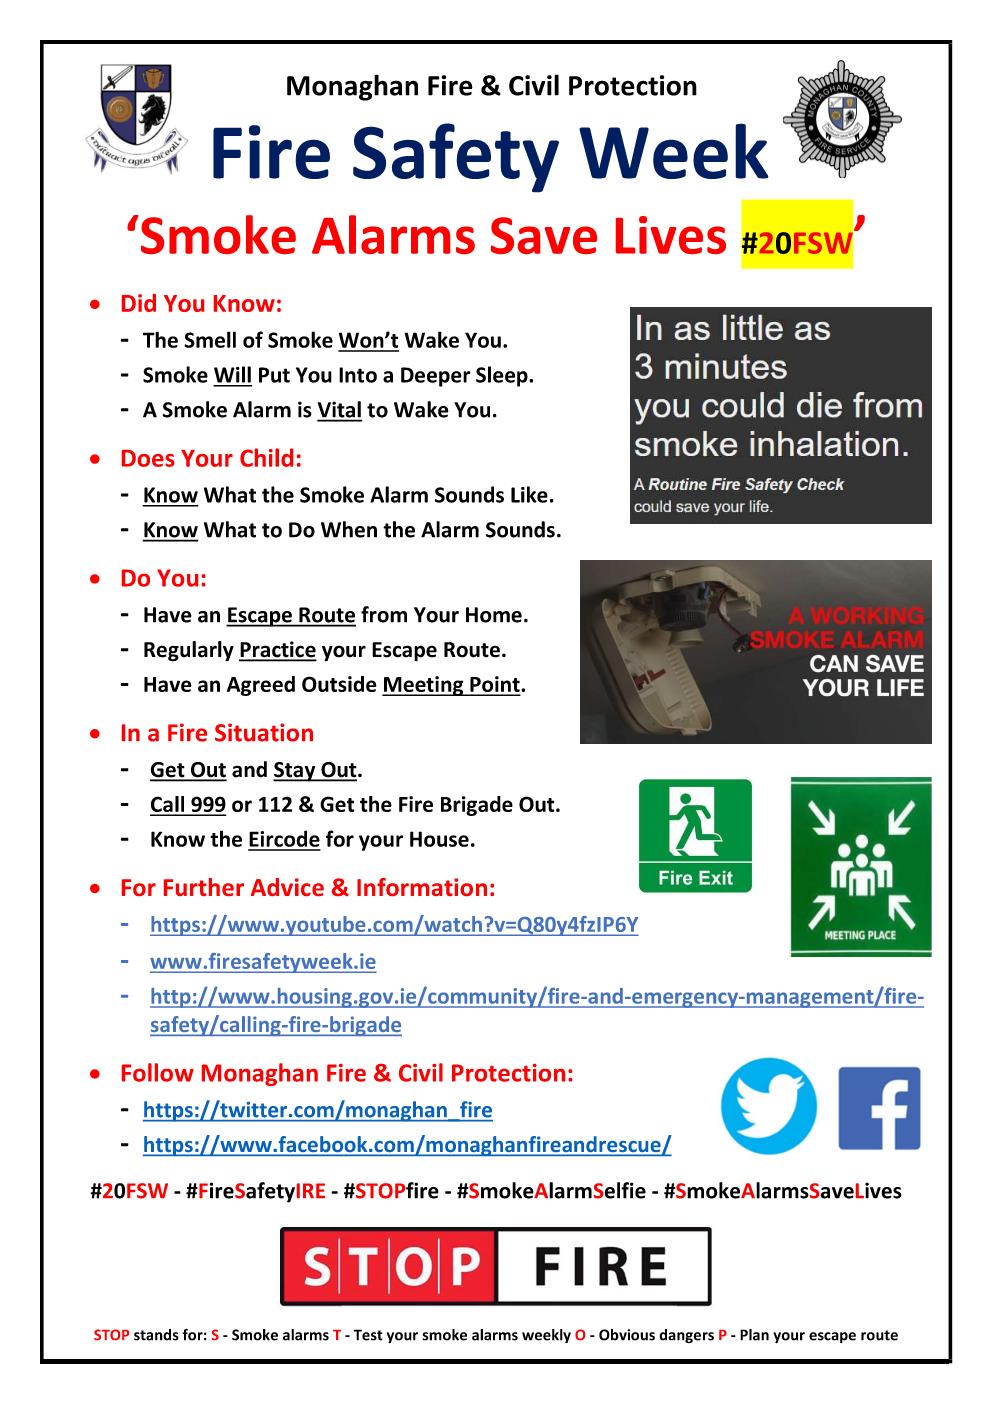 National Fire Safety Week 2020 -Monday October 5 2020